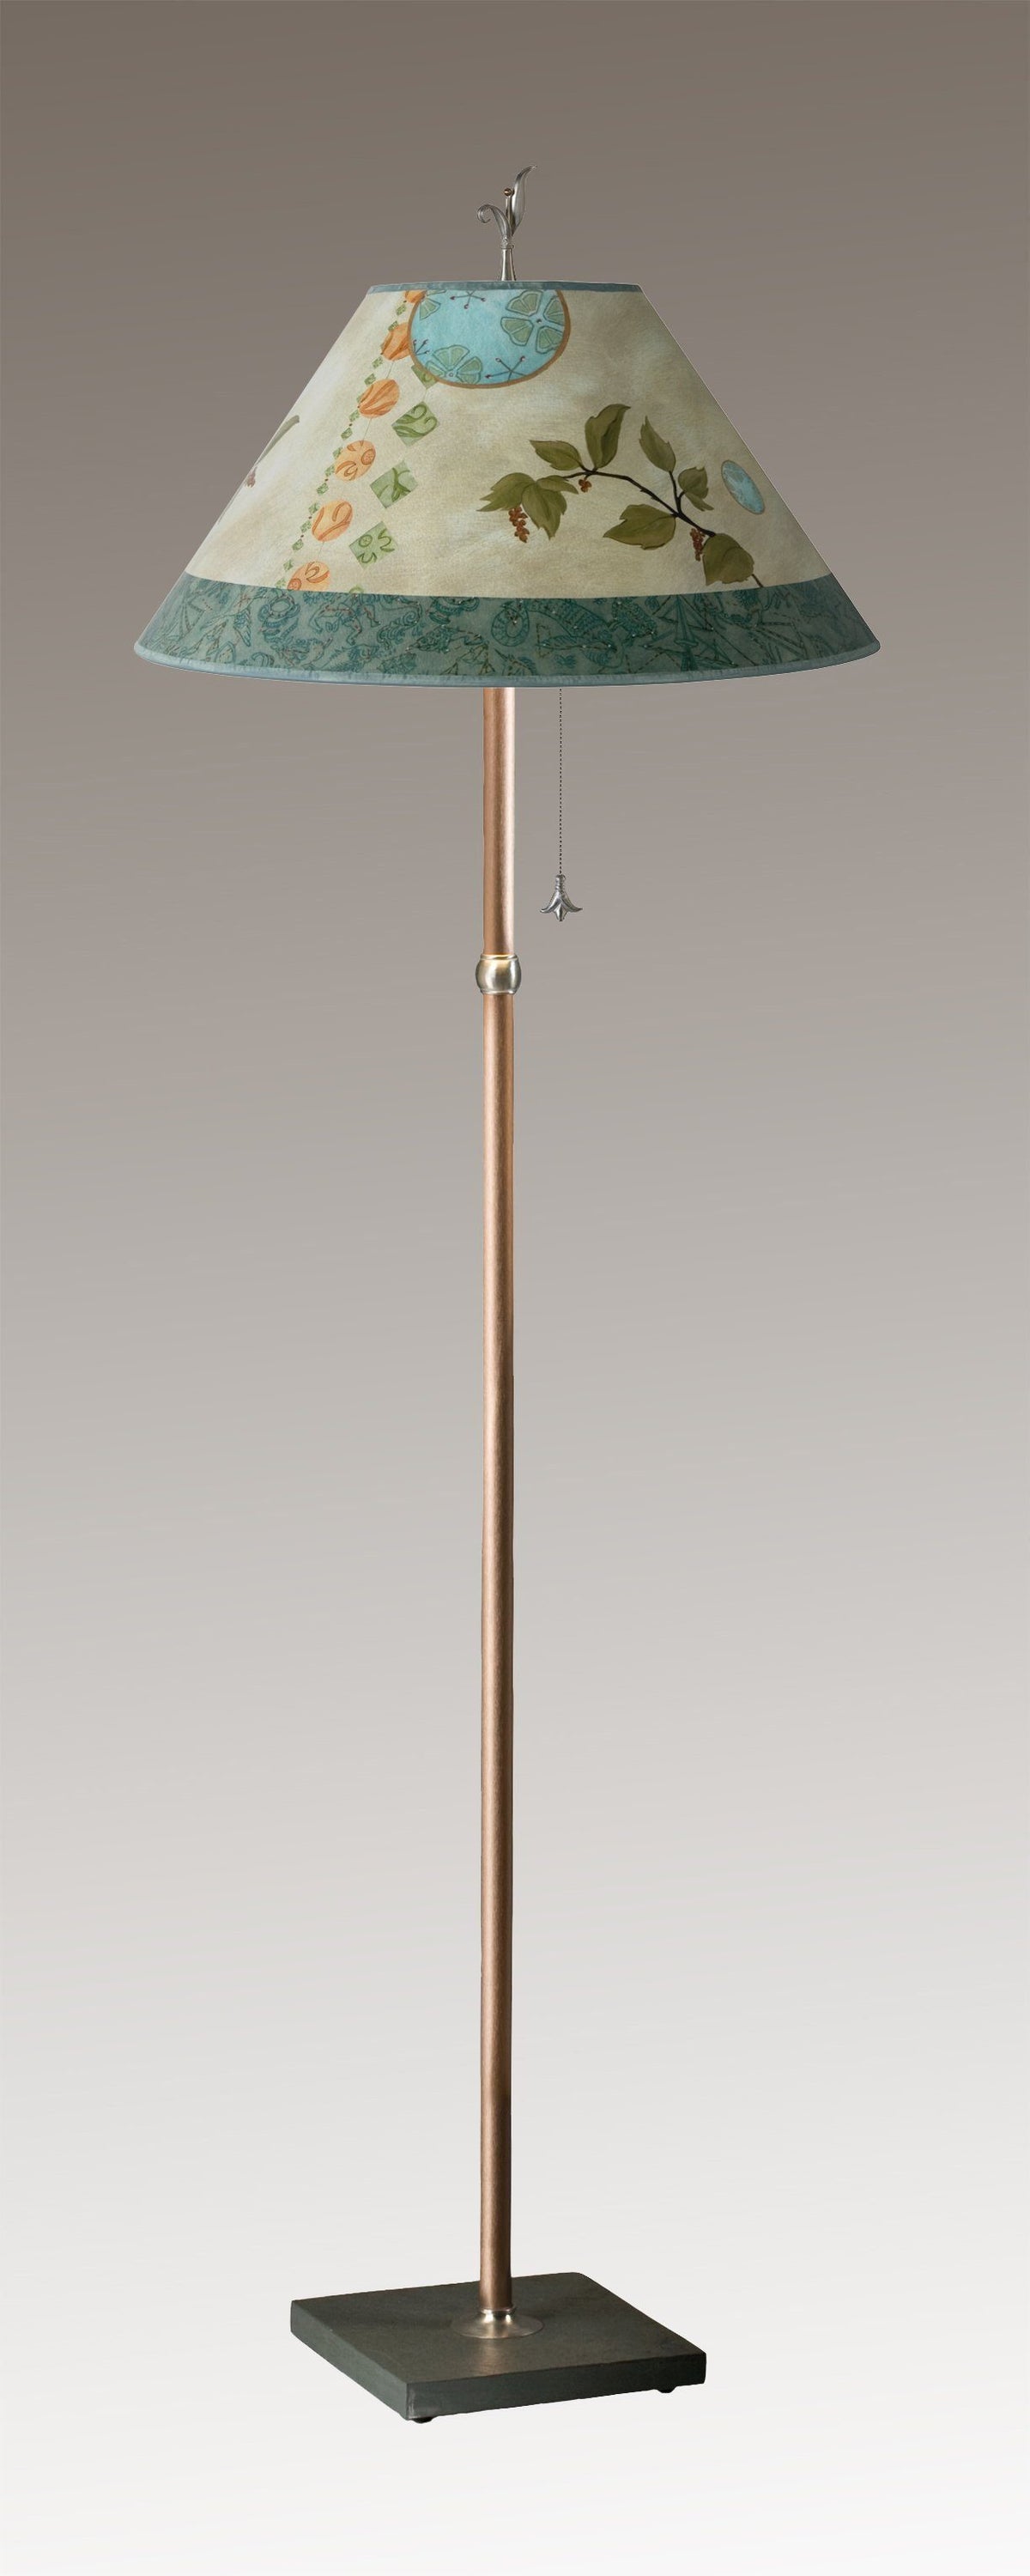 Copper Floor Lamp with Large Conical Shade in Celestial Leaf